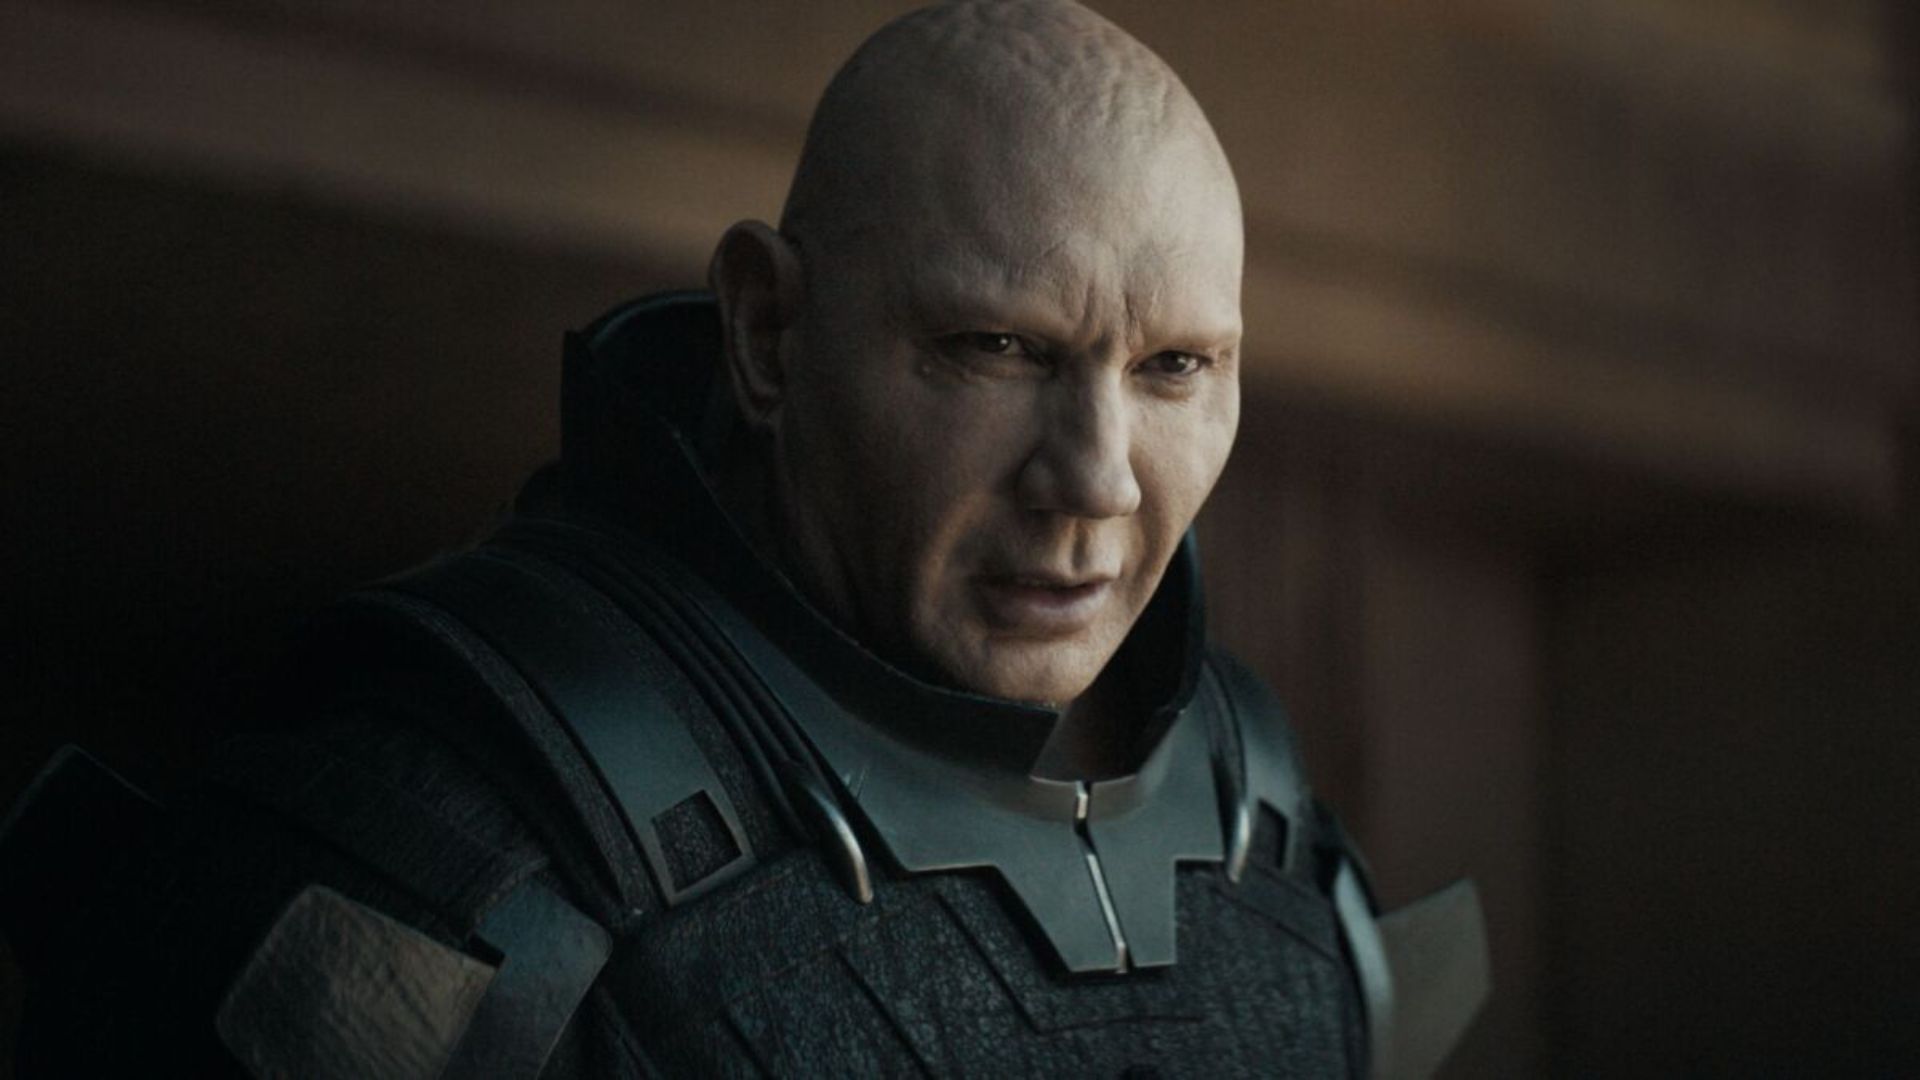 james gunn asked fans who dave bautista should play in the dcu and the most common choice is a forgotten superman villain